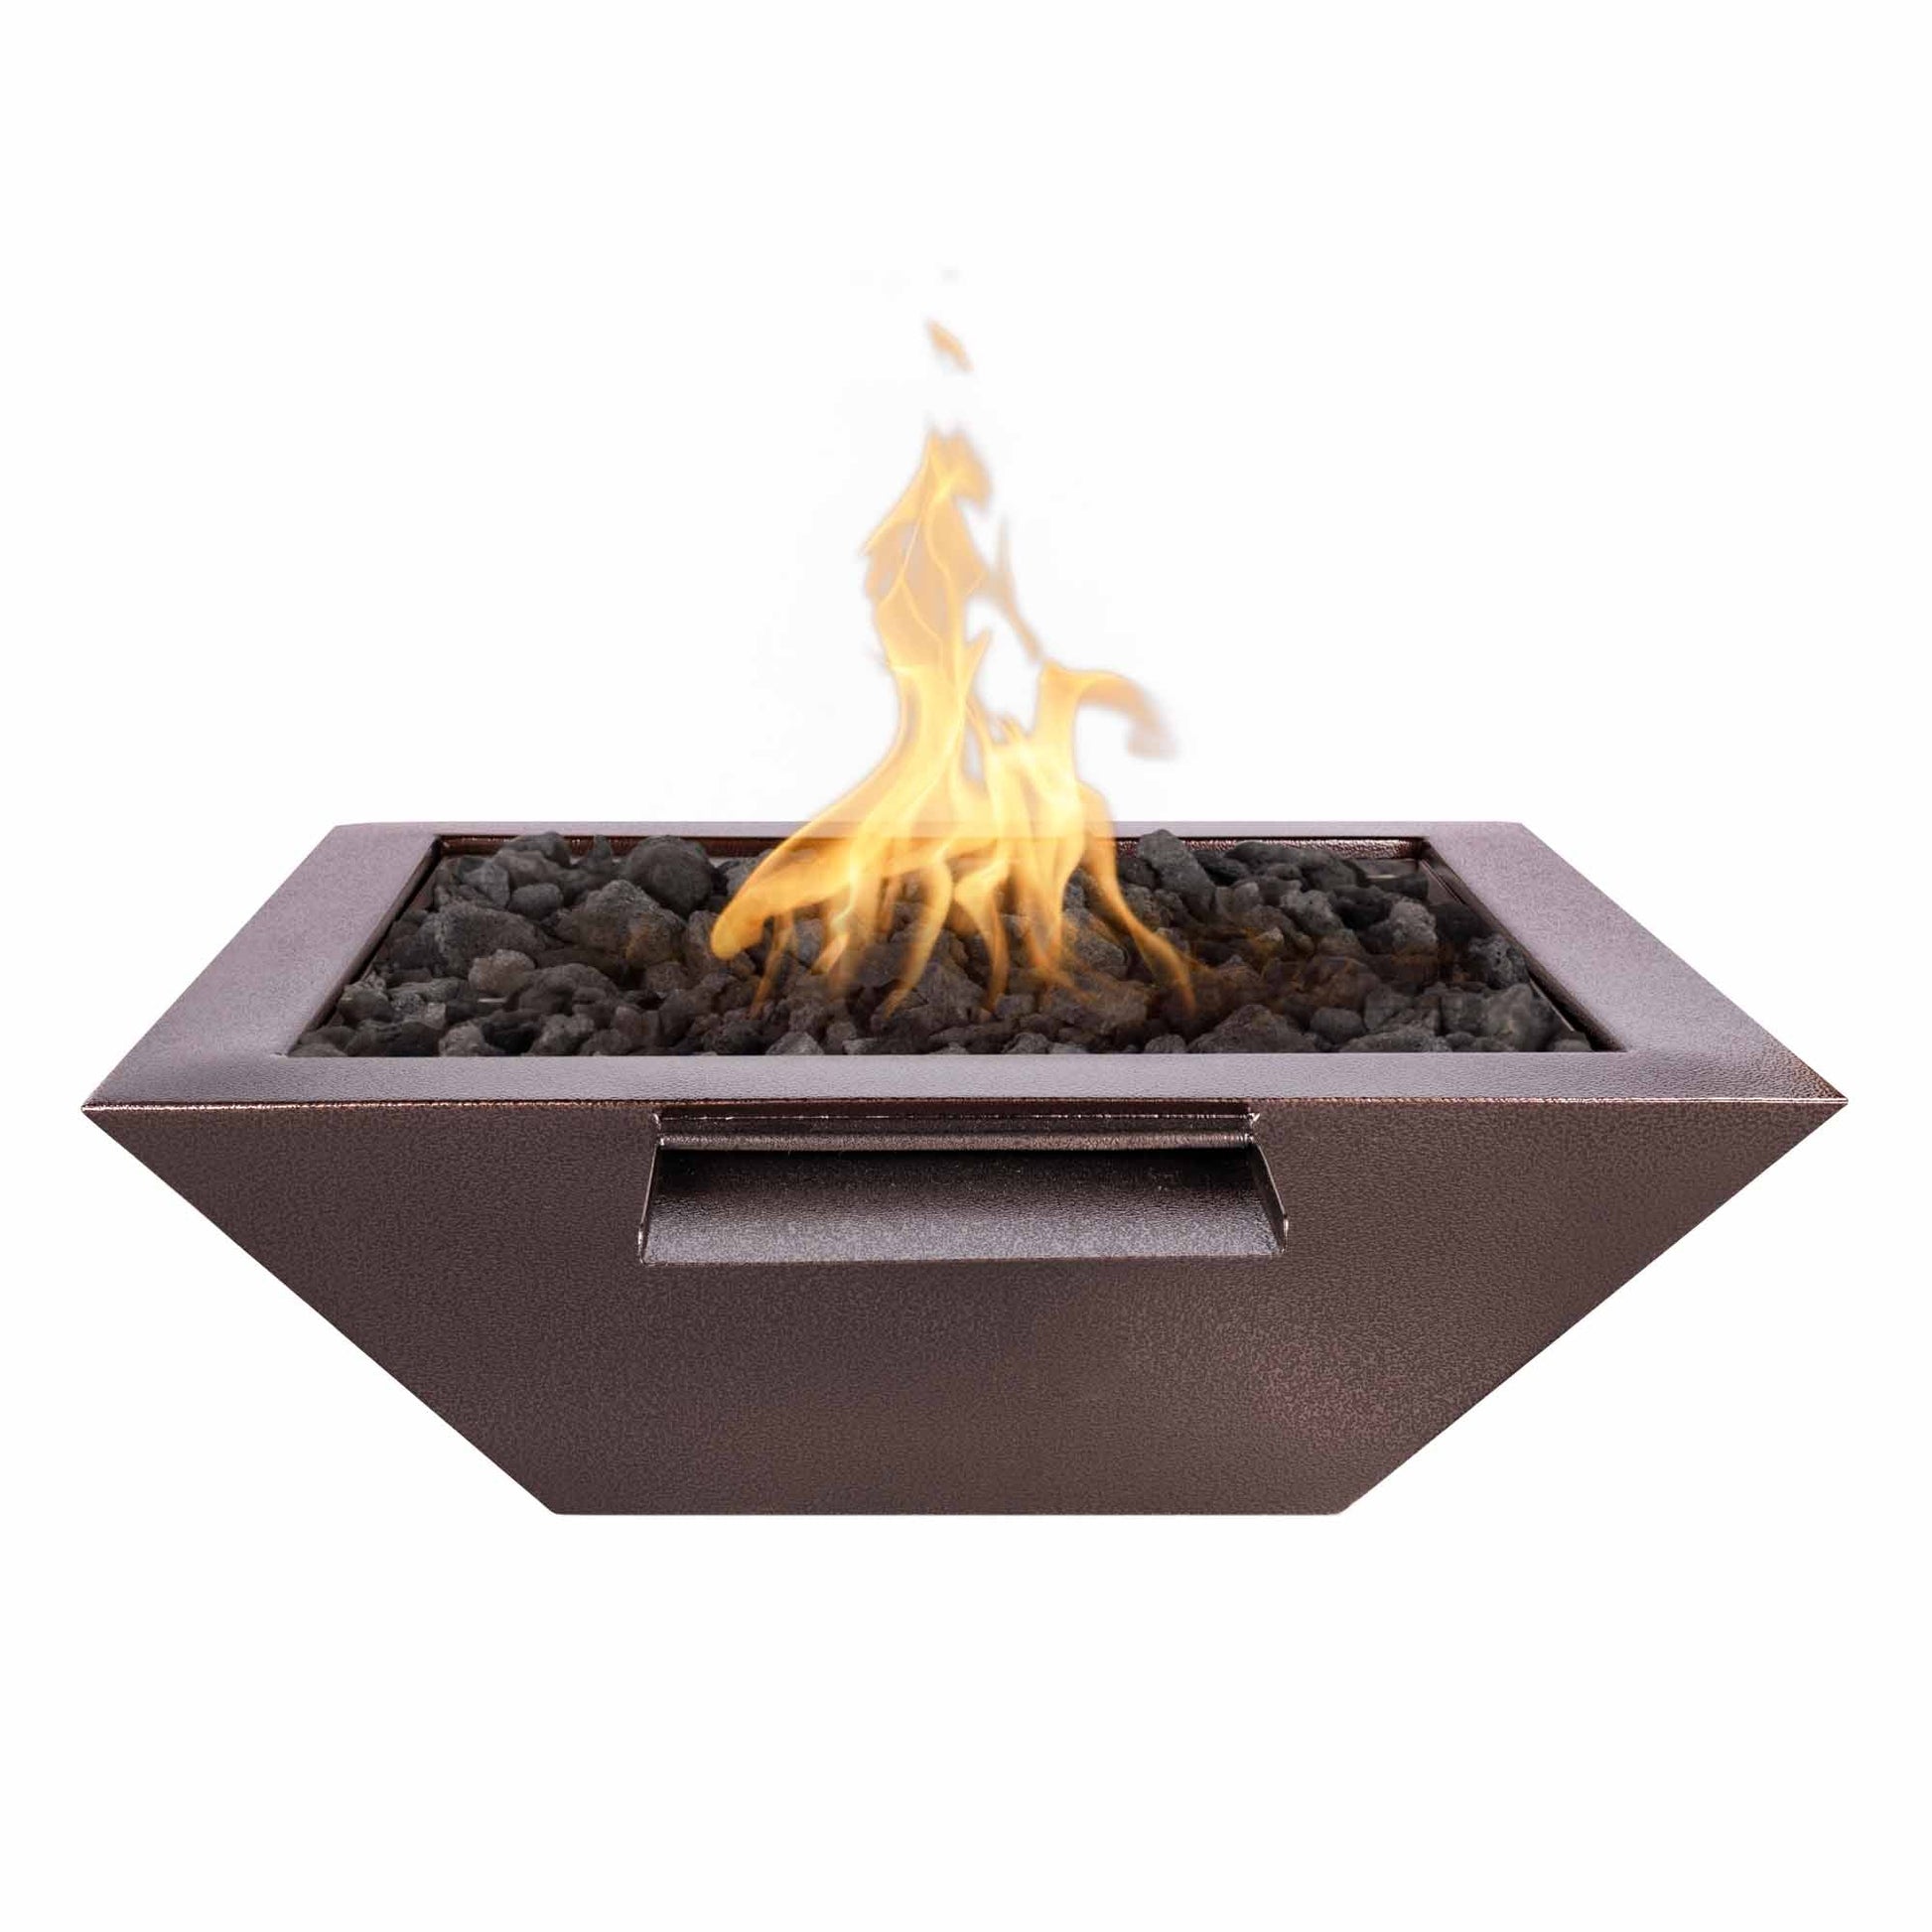 The Outdoor Plus Square Maya 30" Java Powder Coated Metal Liquid Propane Fire Bowl with Match Lit with Flame Sense Ignition